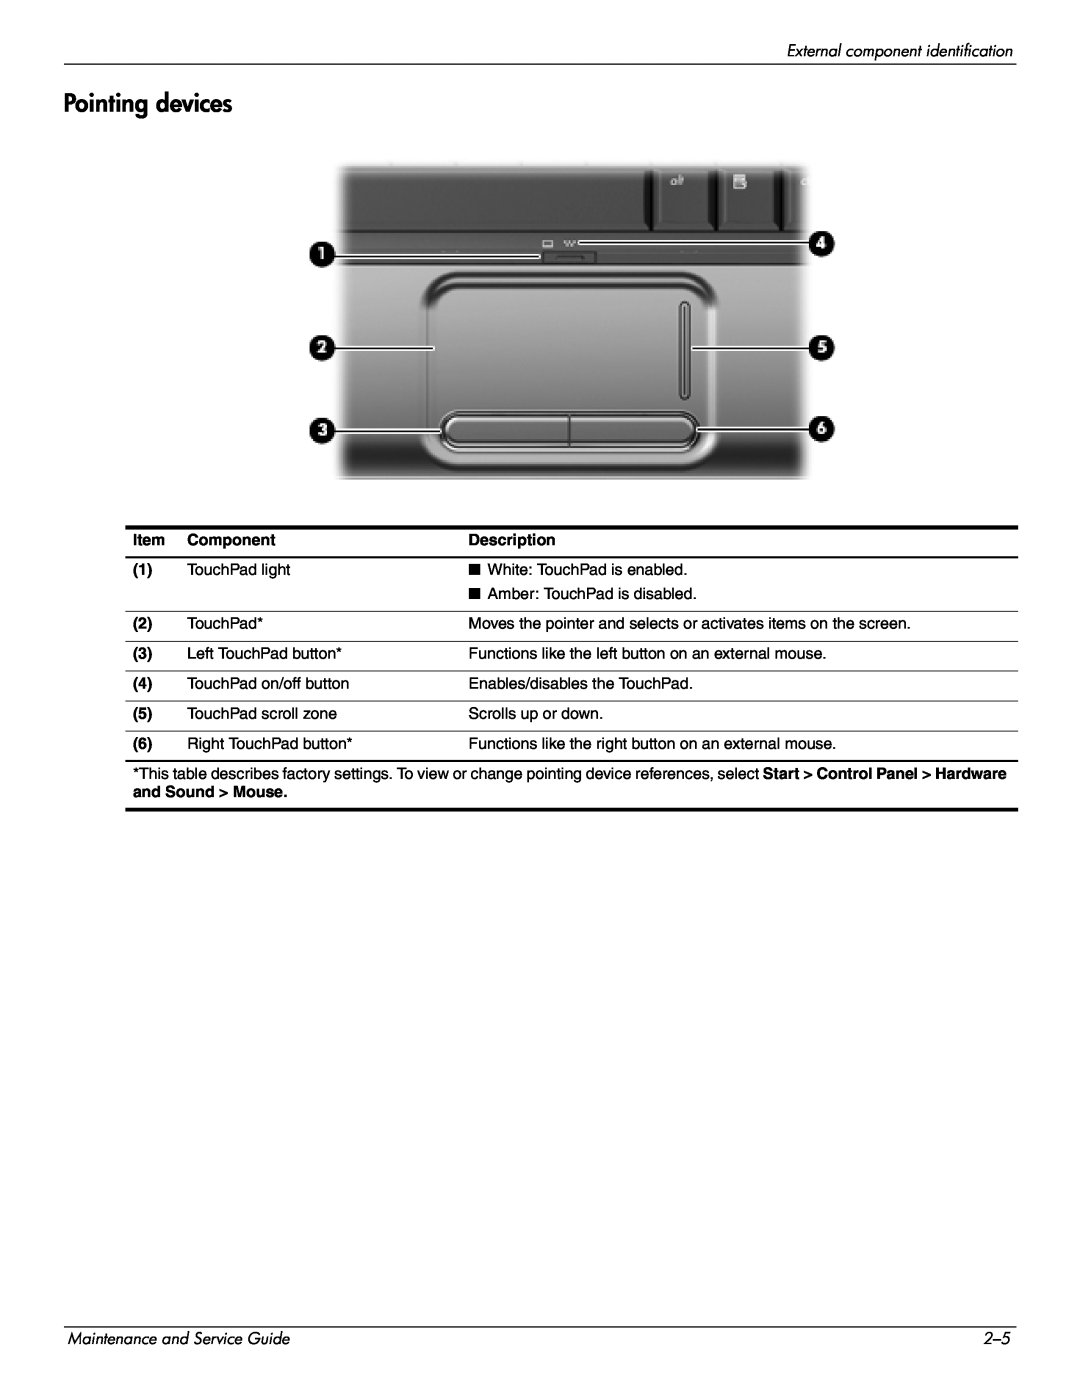 HP CQ35-233TX, CQ35-229TX, CQ35-227TX Pointing devices, External component identification, Maintenance and Service Guide 